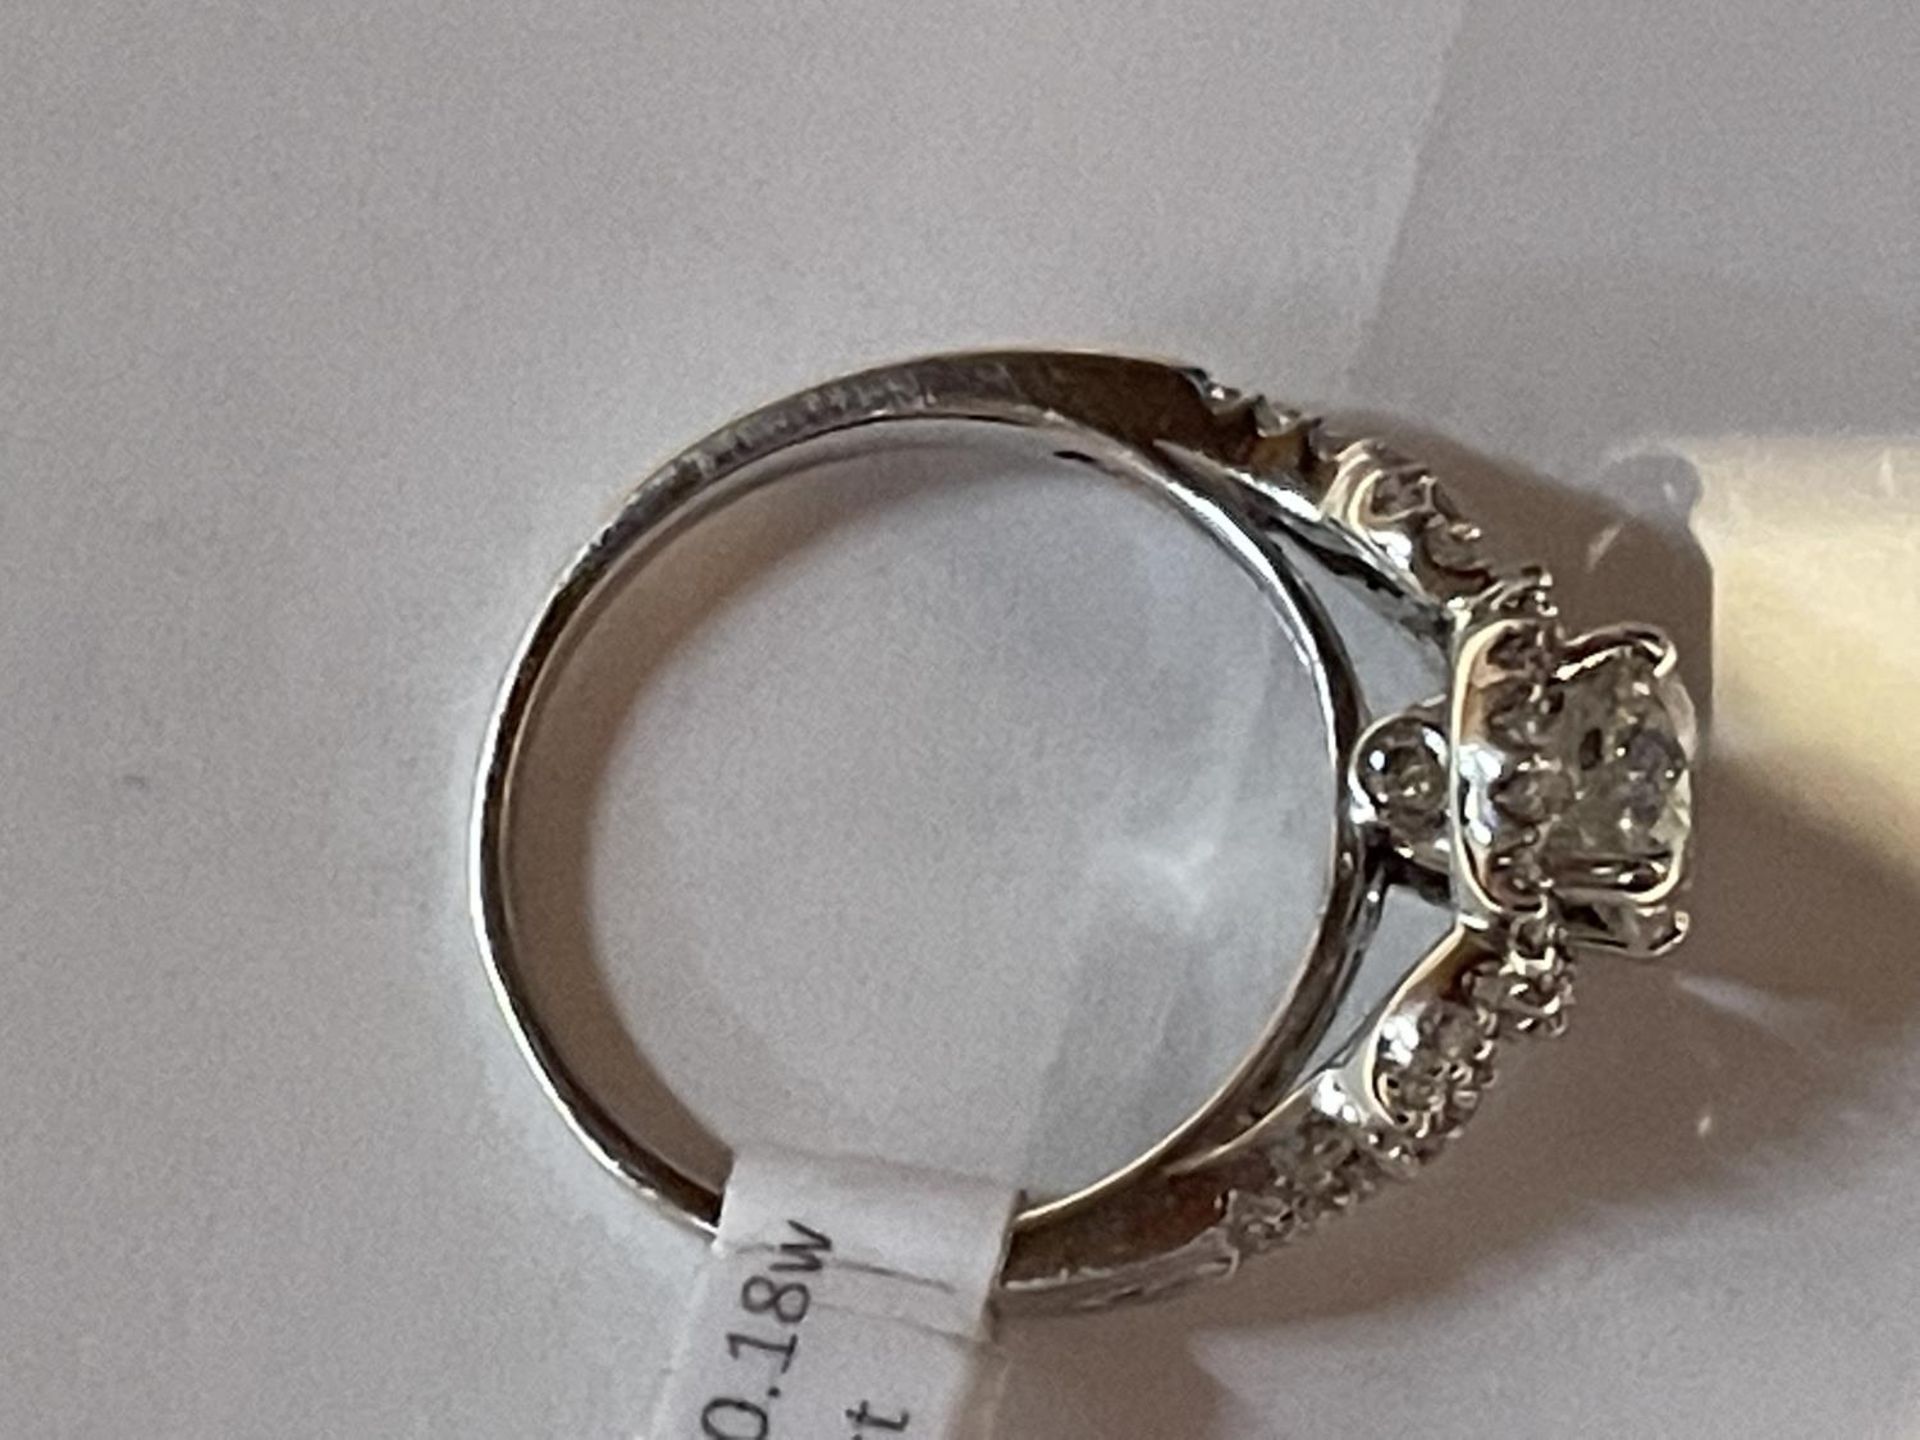 AN 18 CARAT WHITE GOLD RING WITH A CENTRAL 1.03CT SURROUNDED BY SMALL DIAMONDS MADE UP TO 0.30CT - Image 4 of 4